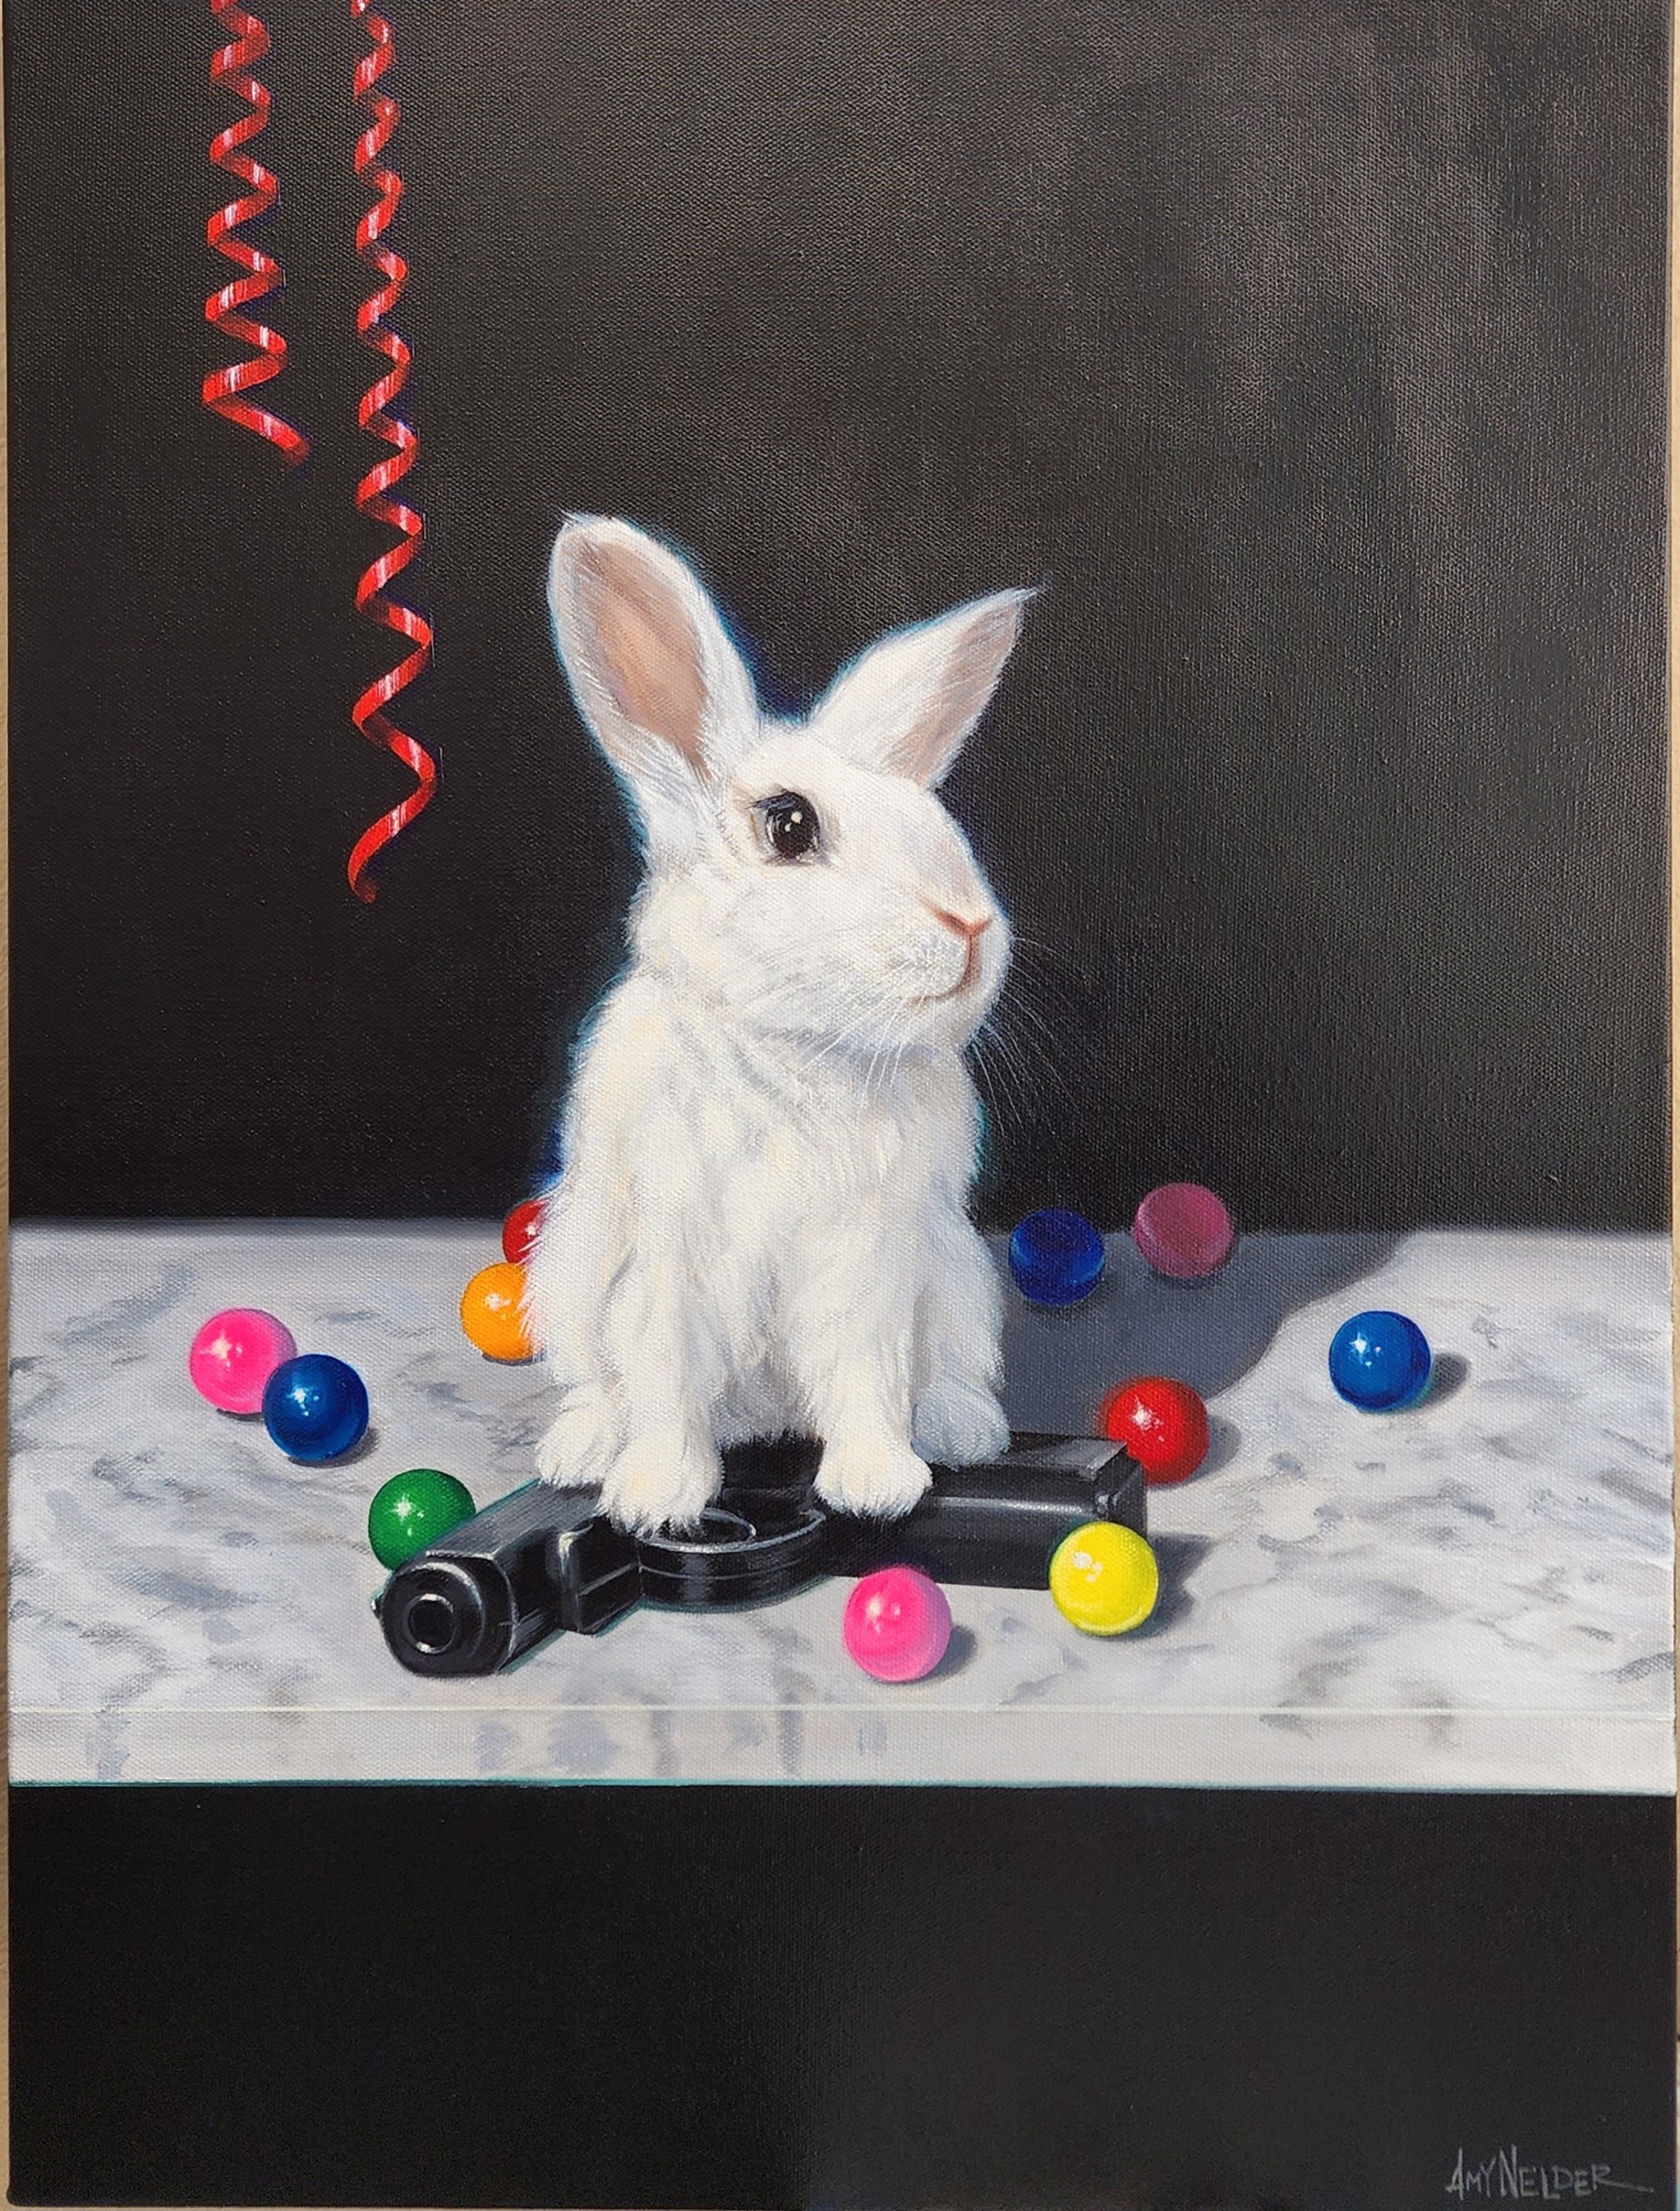 Bunnies and Guns #8 by Amy Nelder